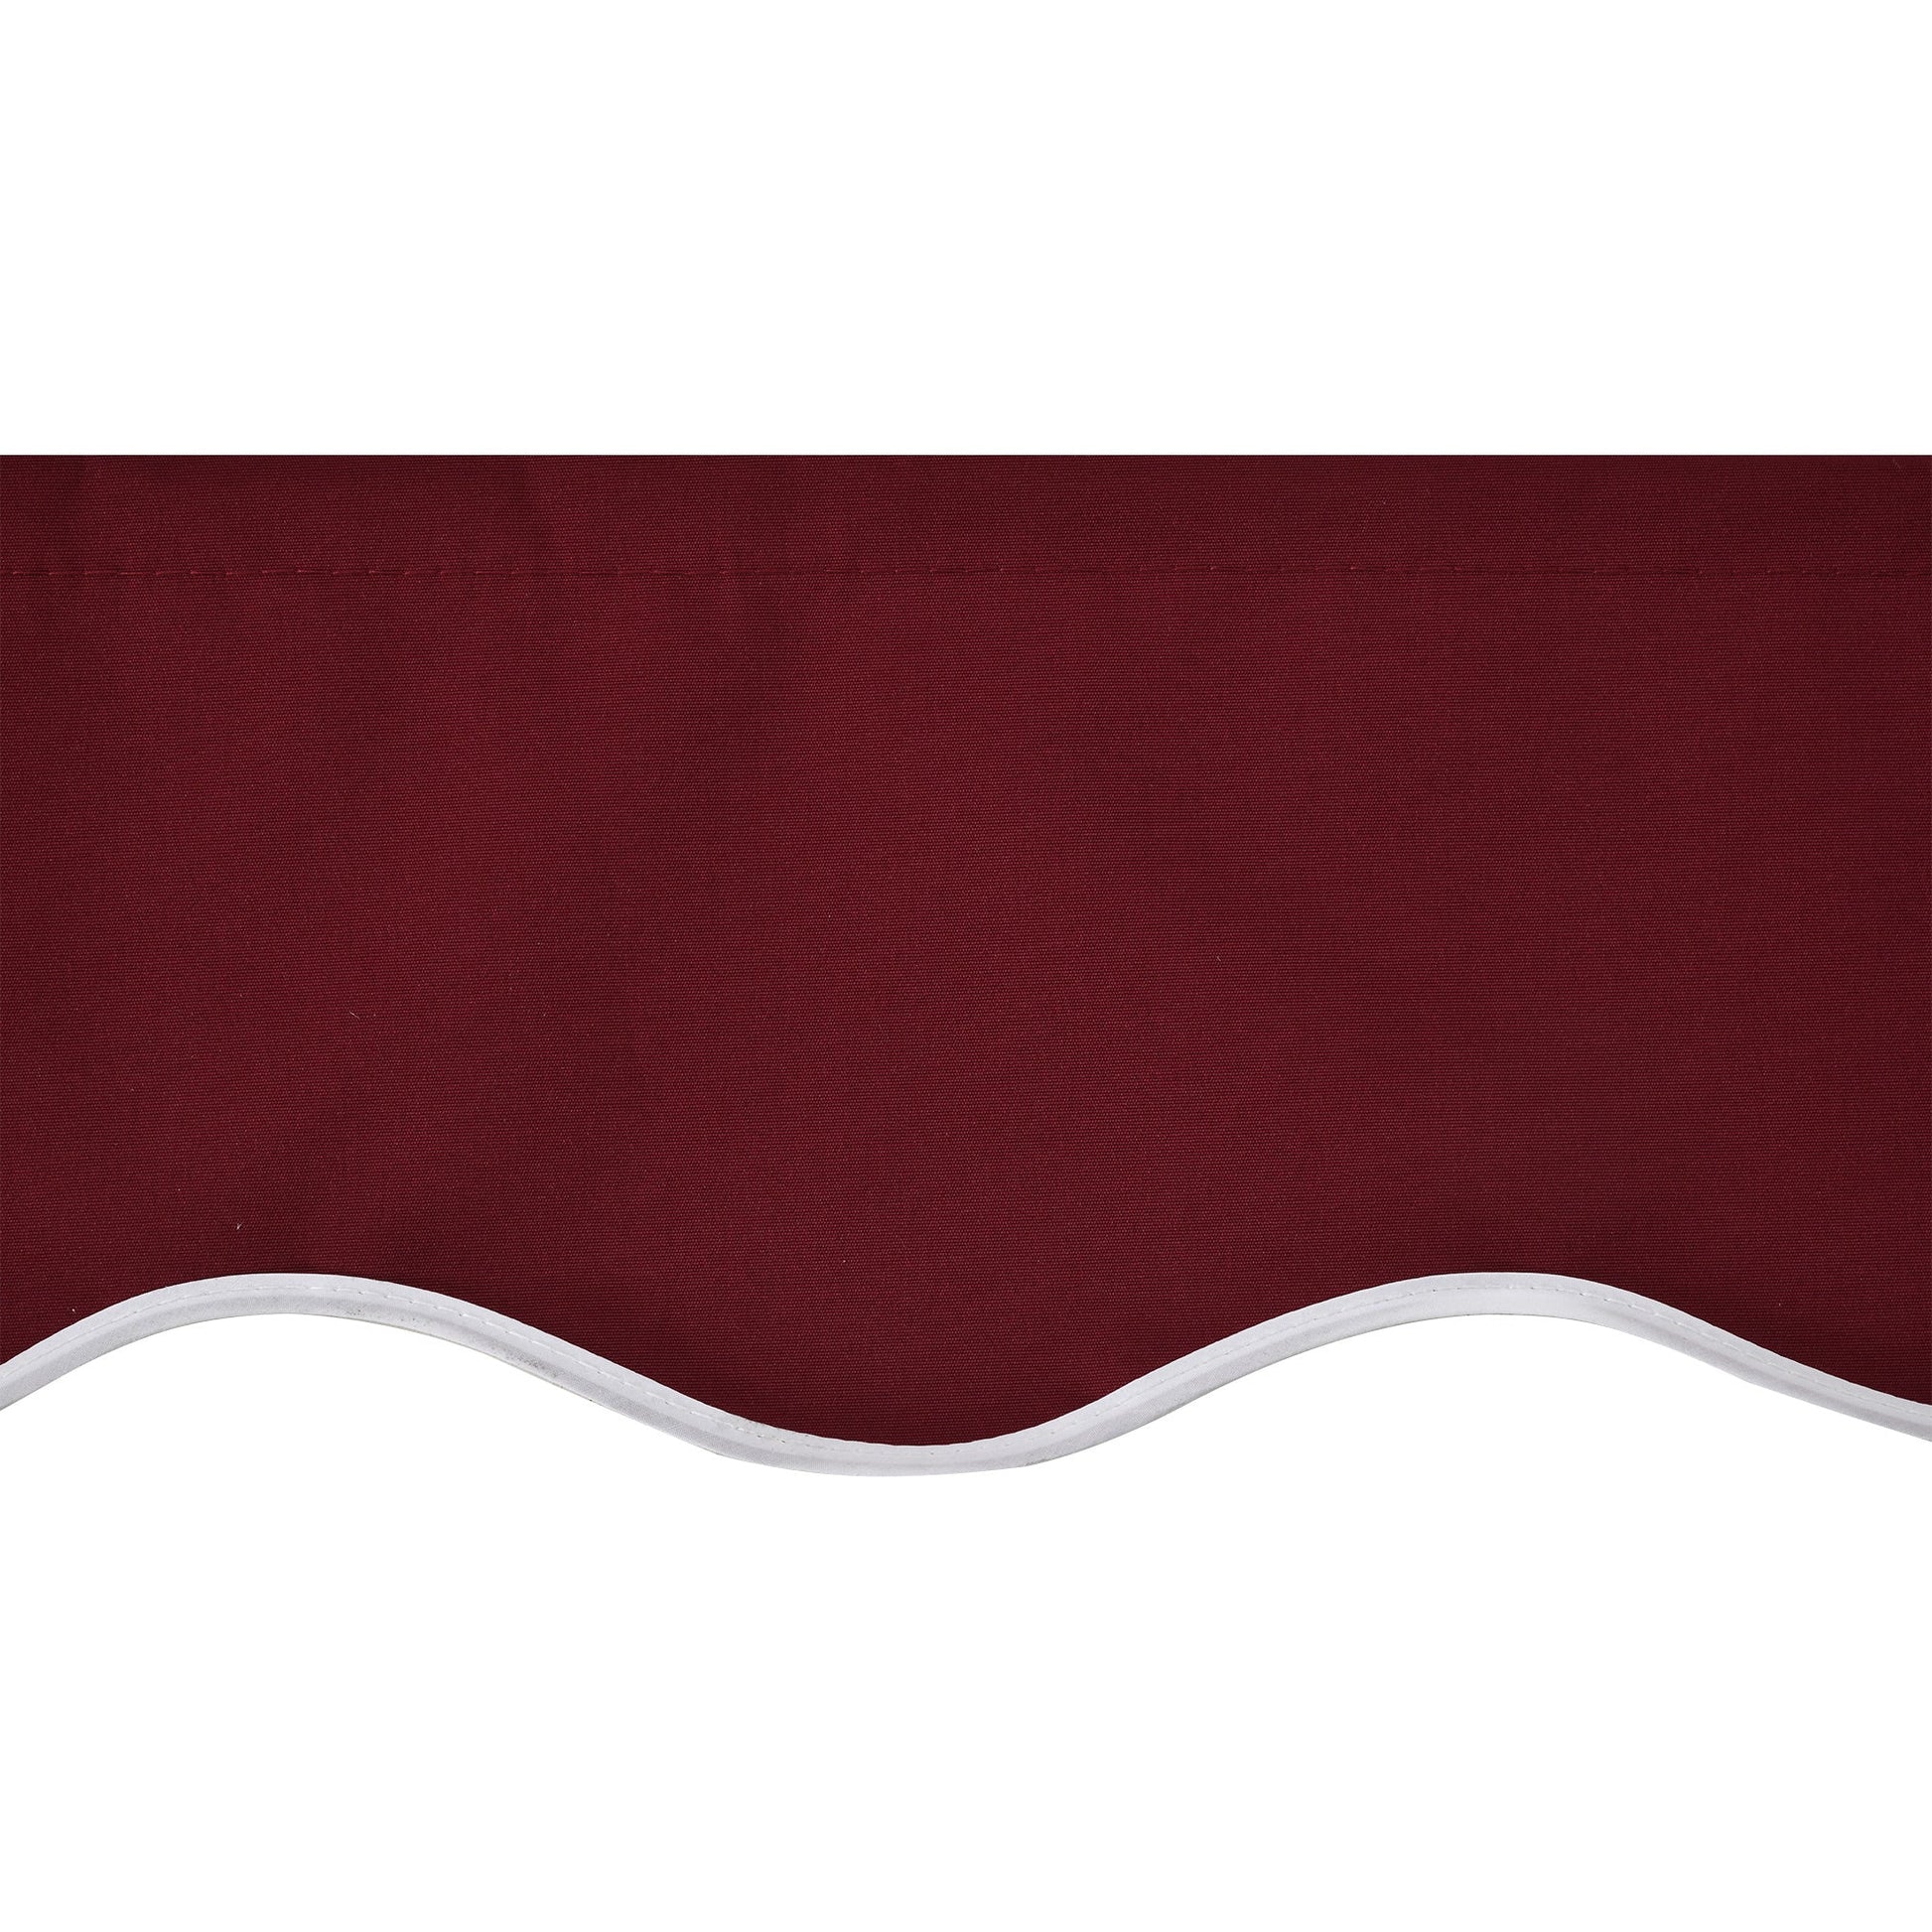 9' x 8' Outdoor Sunshade Canopy Awning Cover, Retractable Awning Fabric Replacement, UV Protection, Wine Red - Gallery Canada